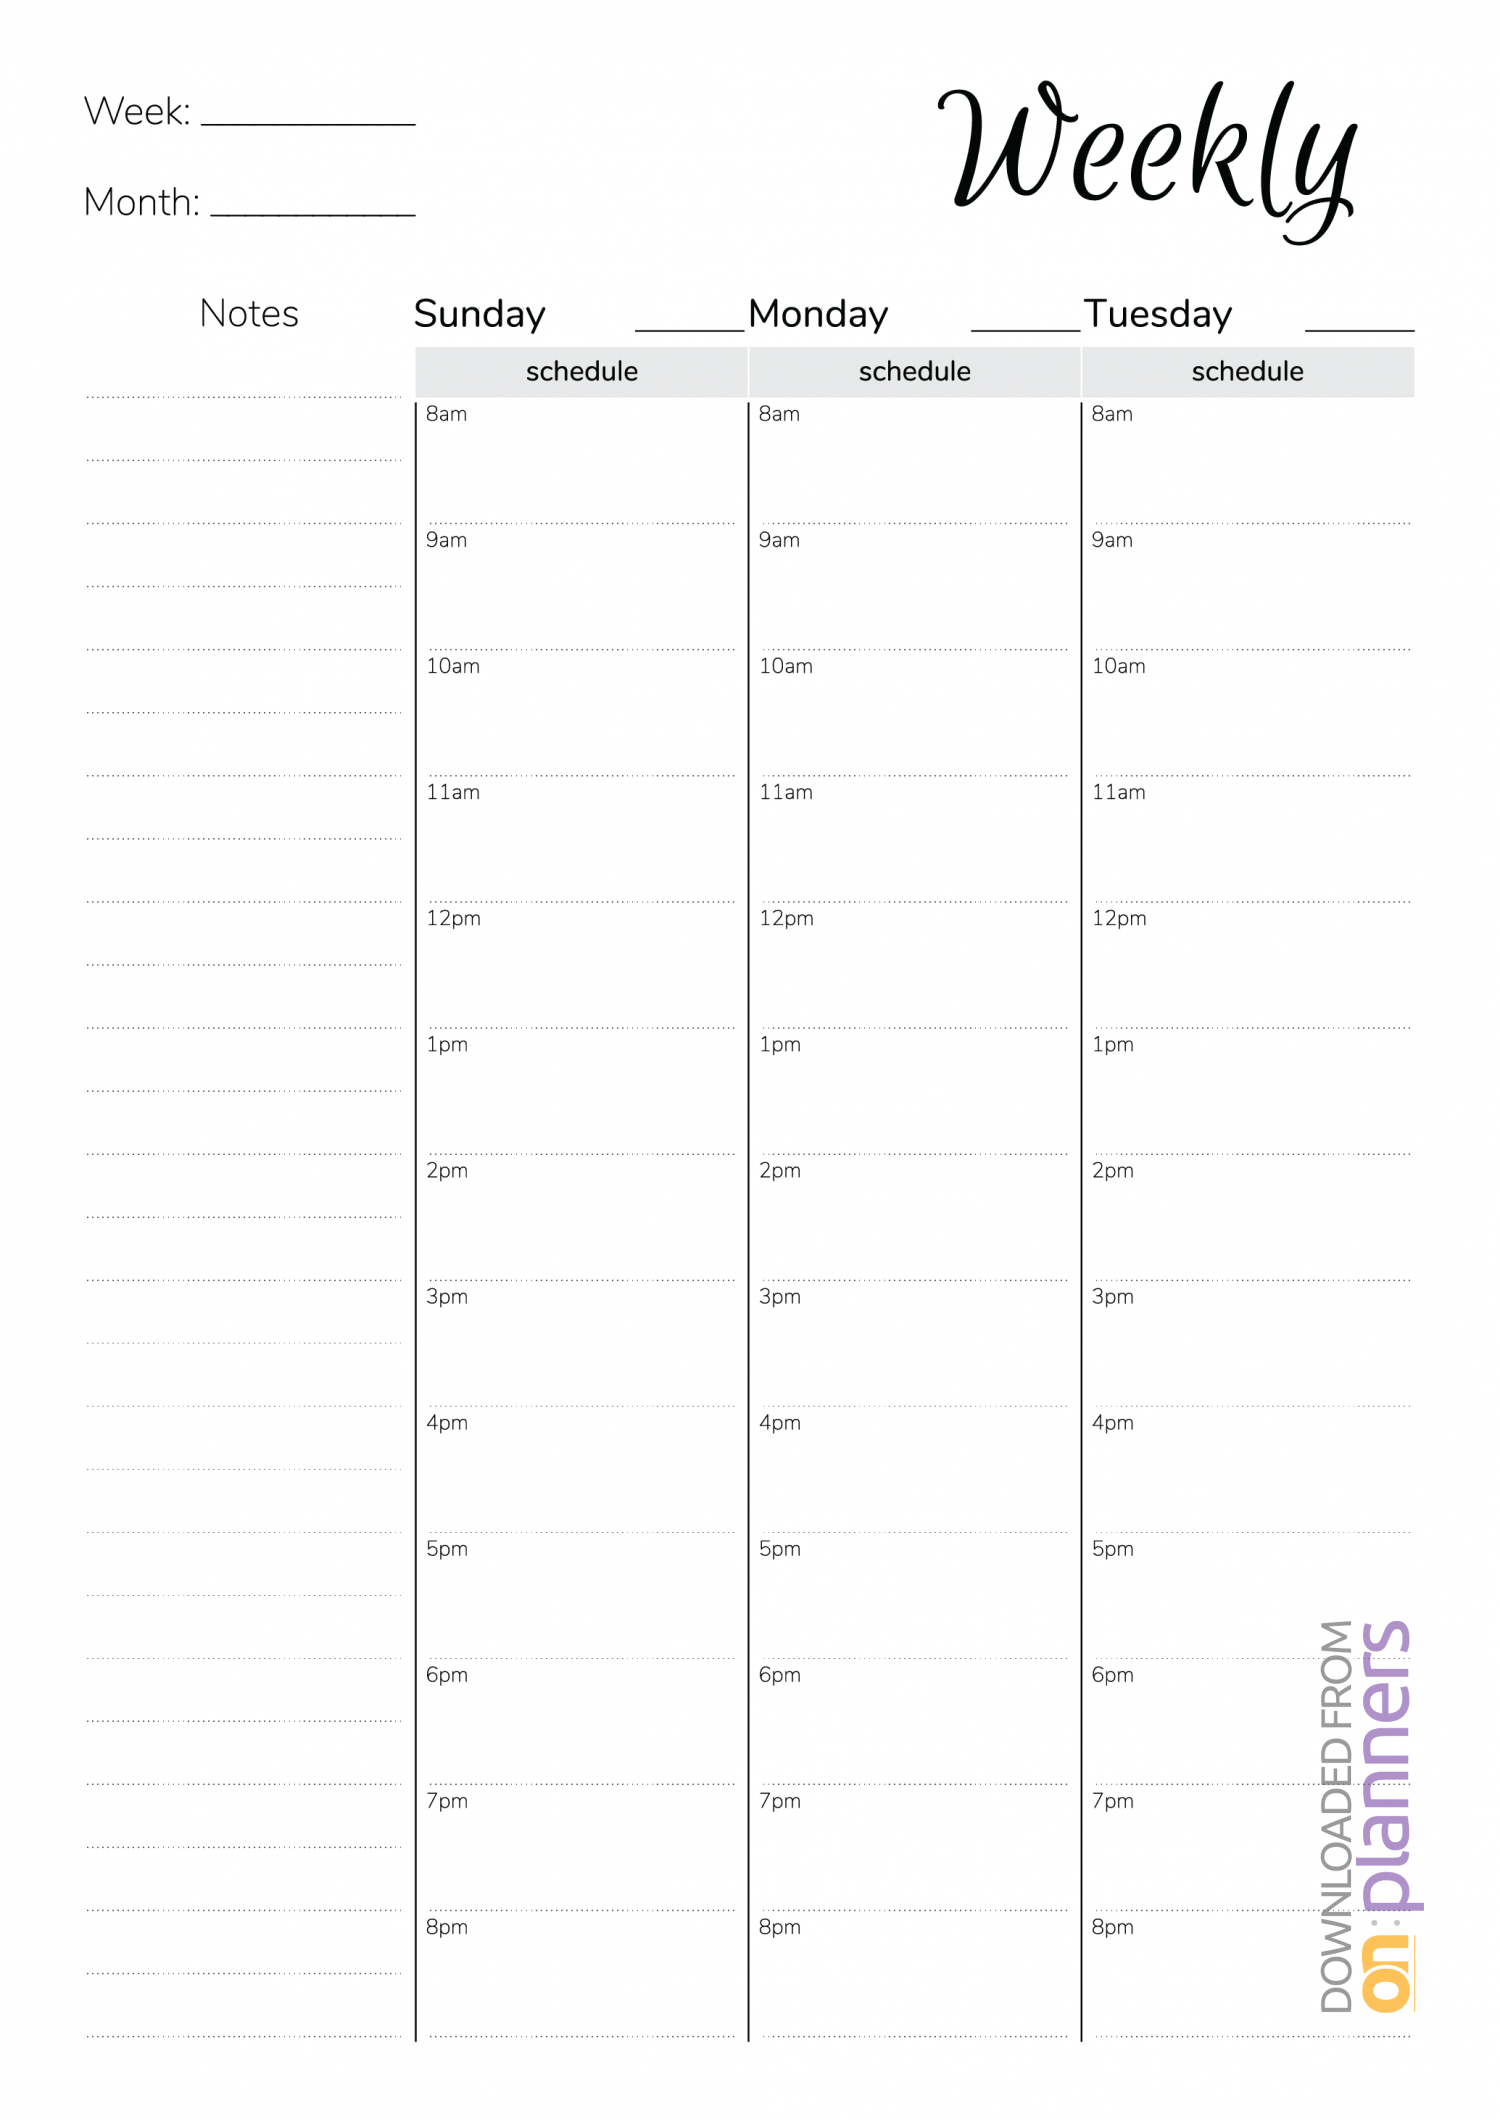 hourly weekly schedule pdf calendar for planning